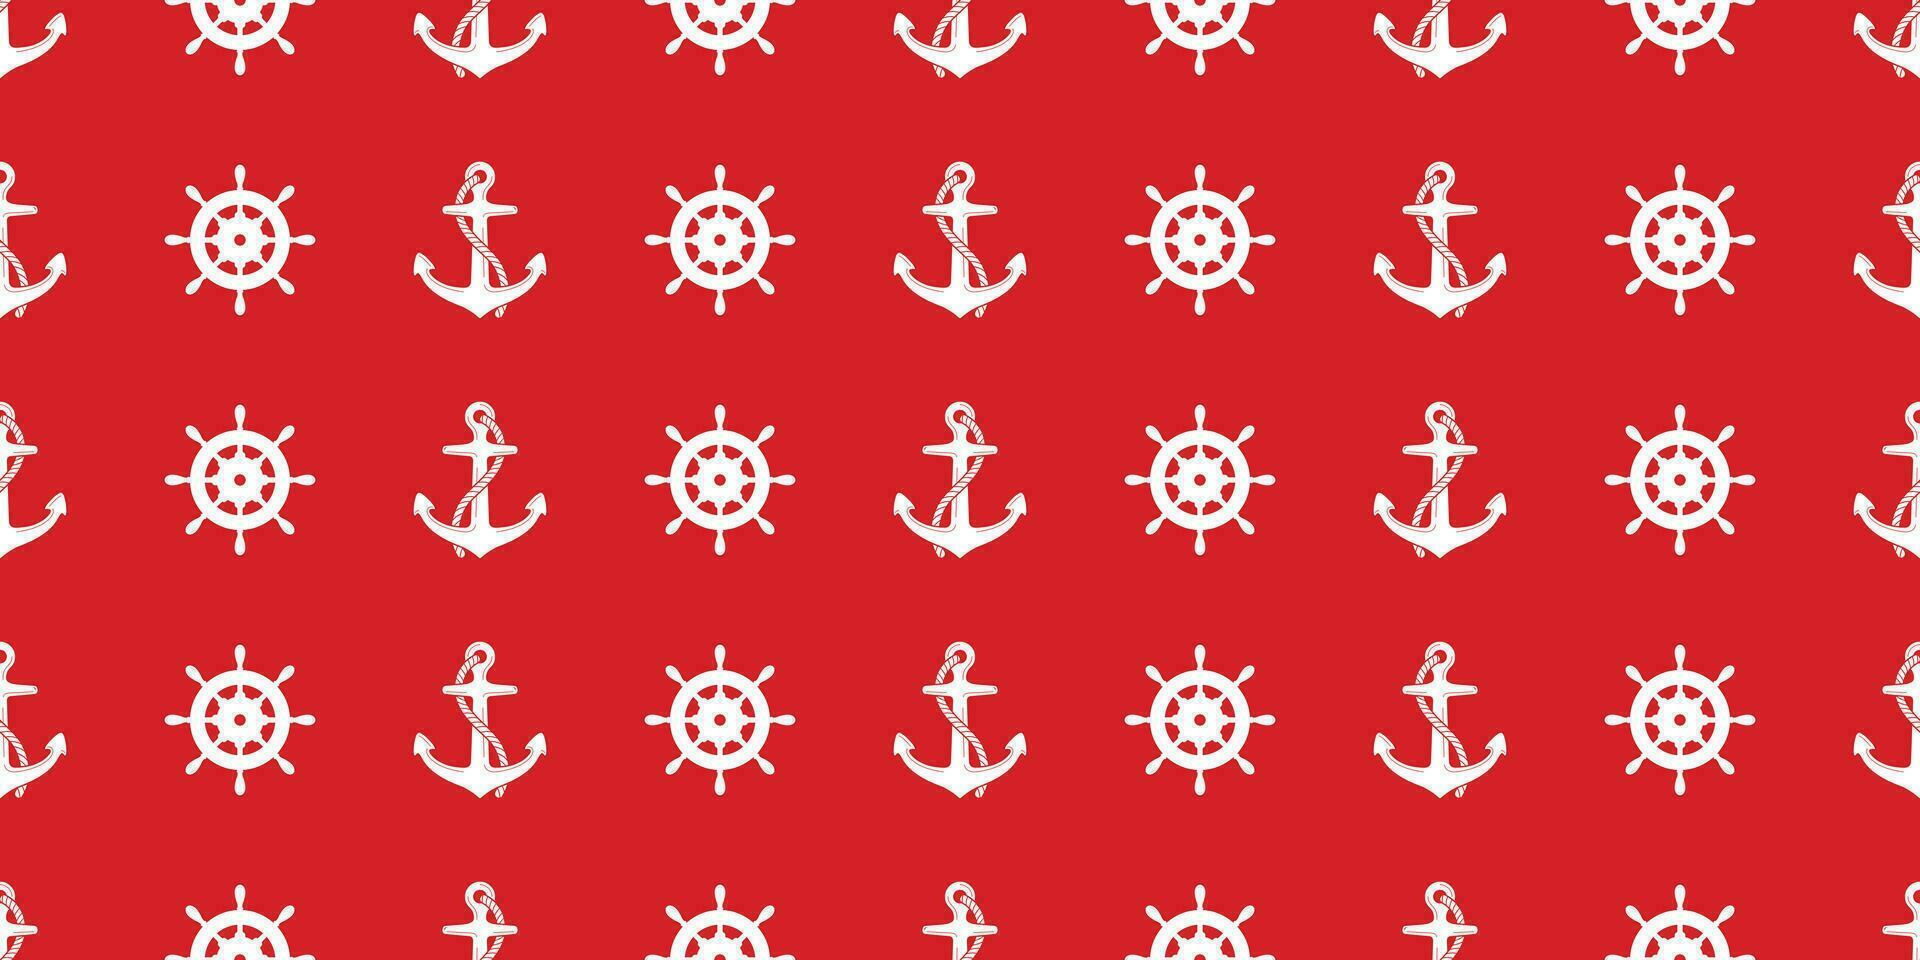 Anchor helm Seamless Pattern vector boat isolated maritime Nautical sea ocean repeat wallpaper tile background red